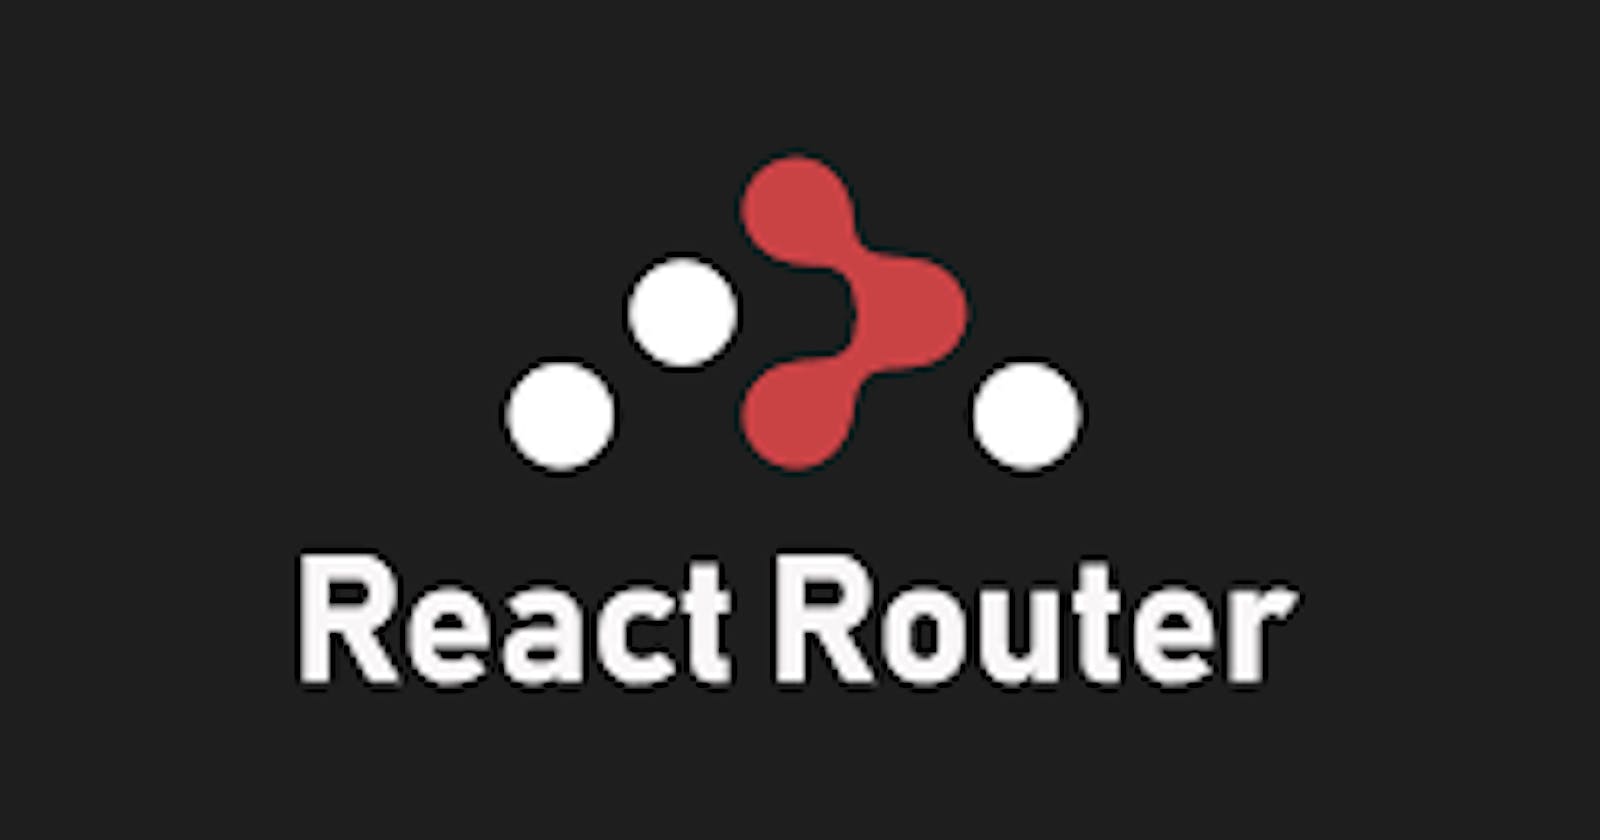 Routing in React